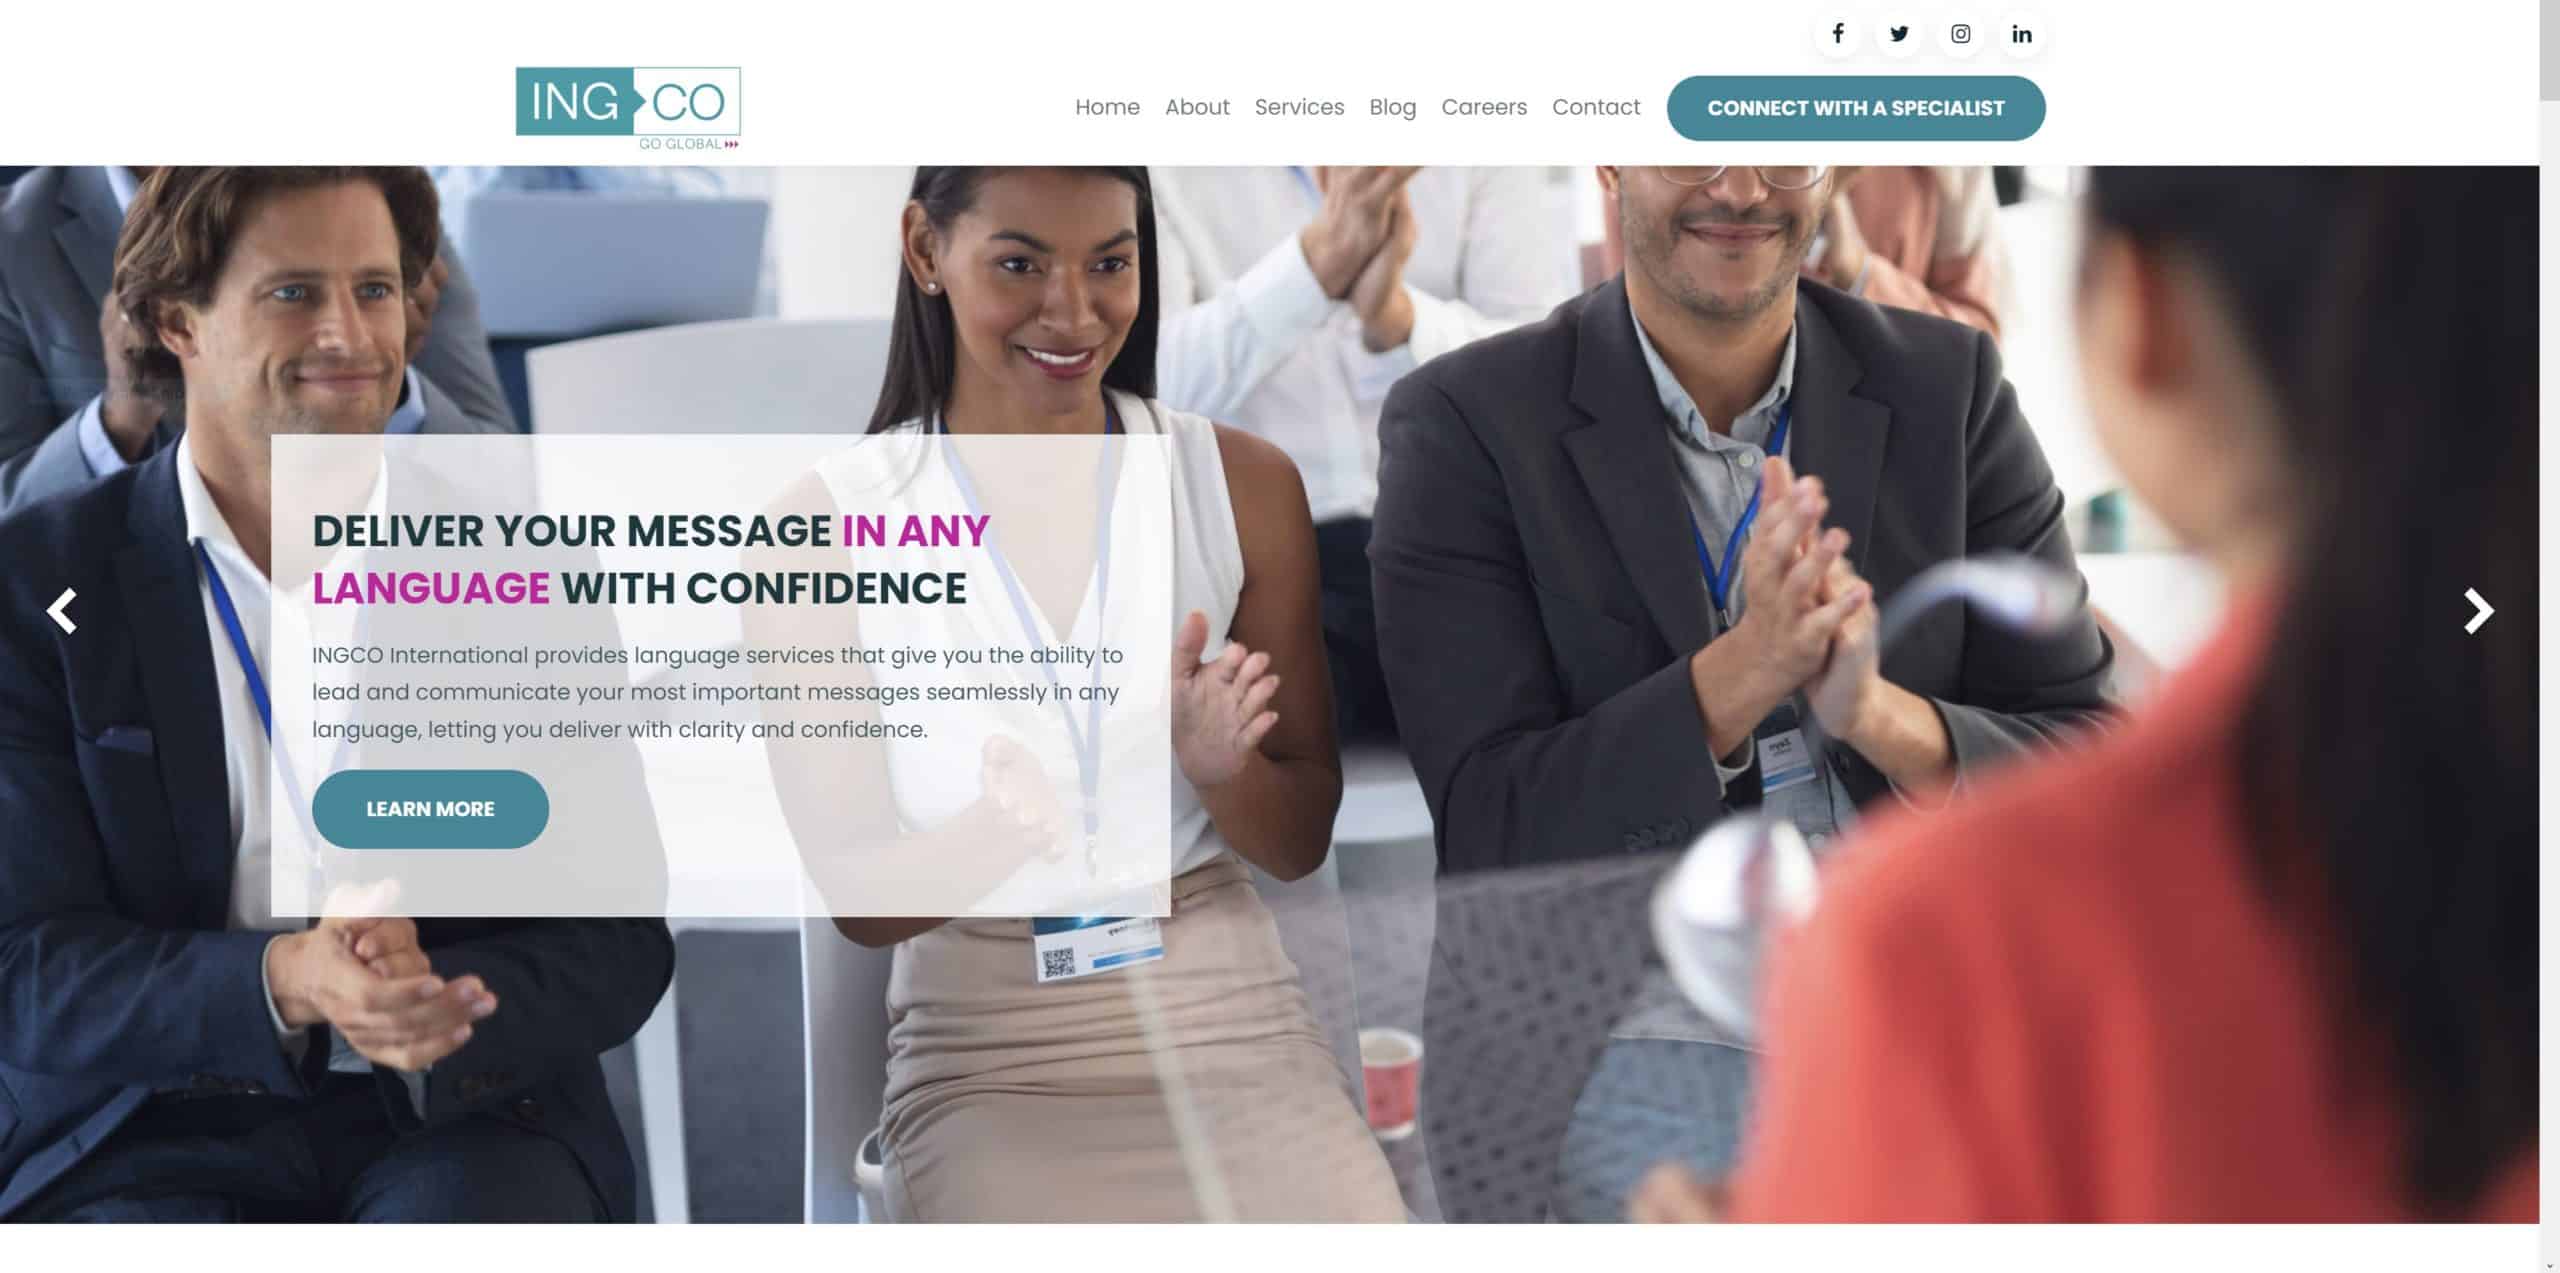 How INGCO Got to the Next Level With Their Digital Marketing